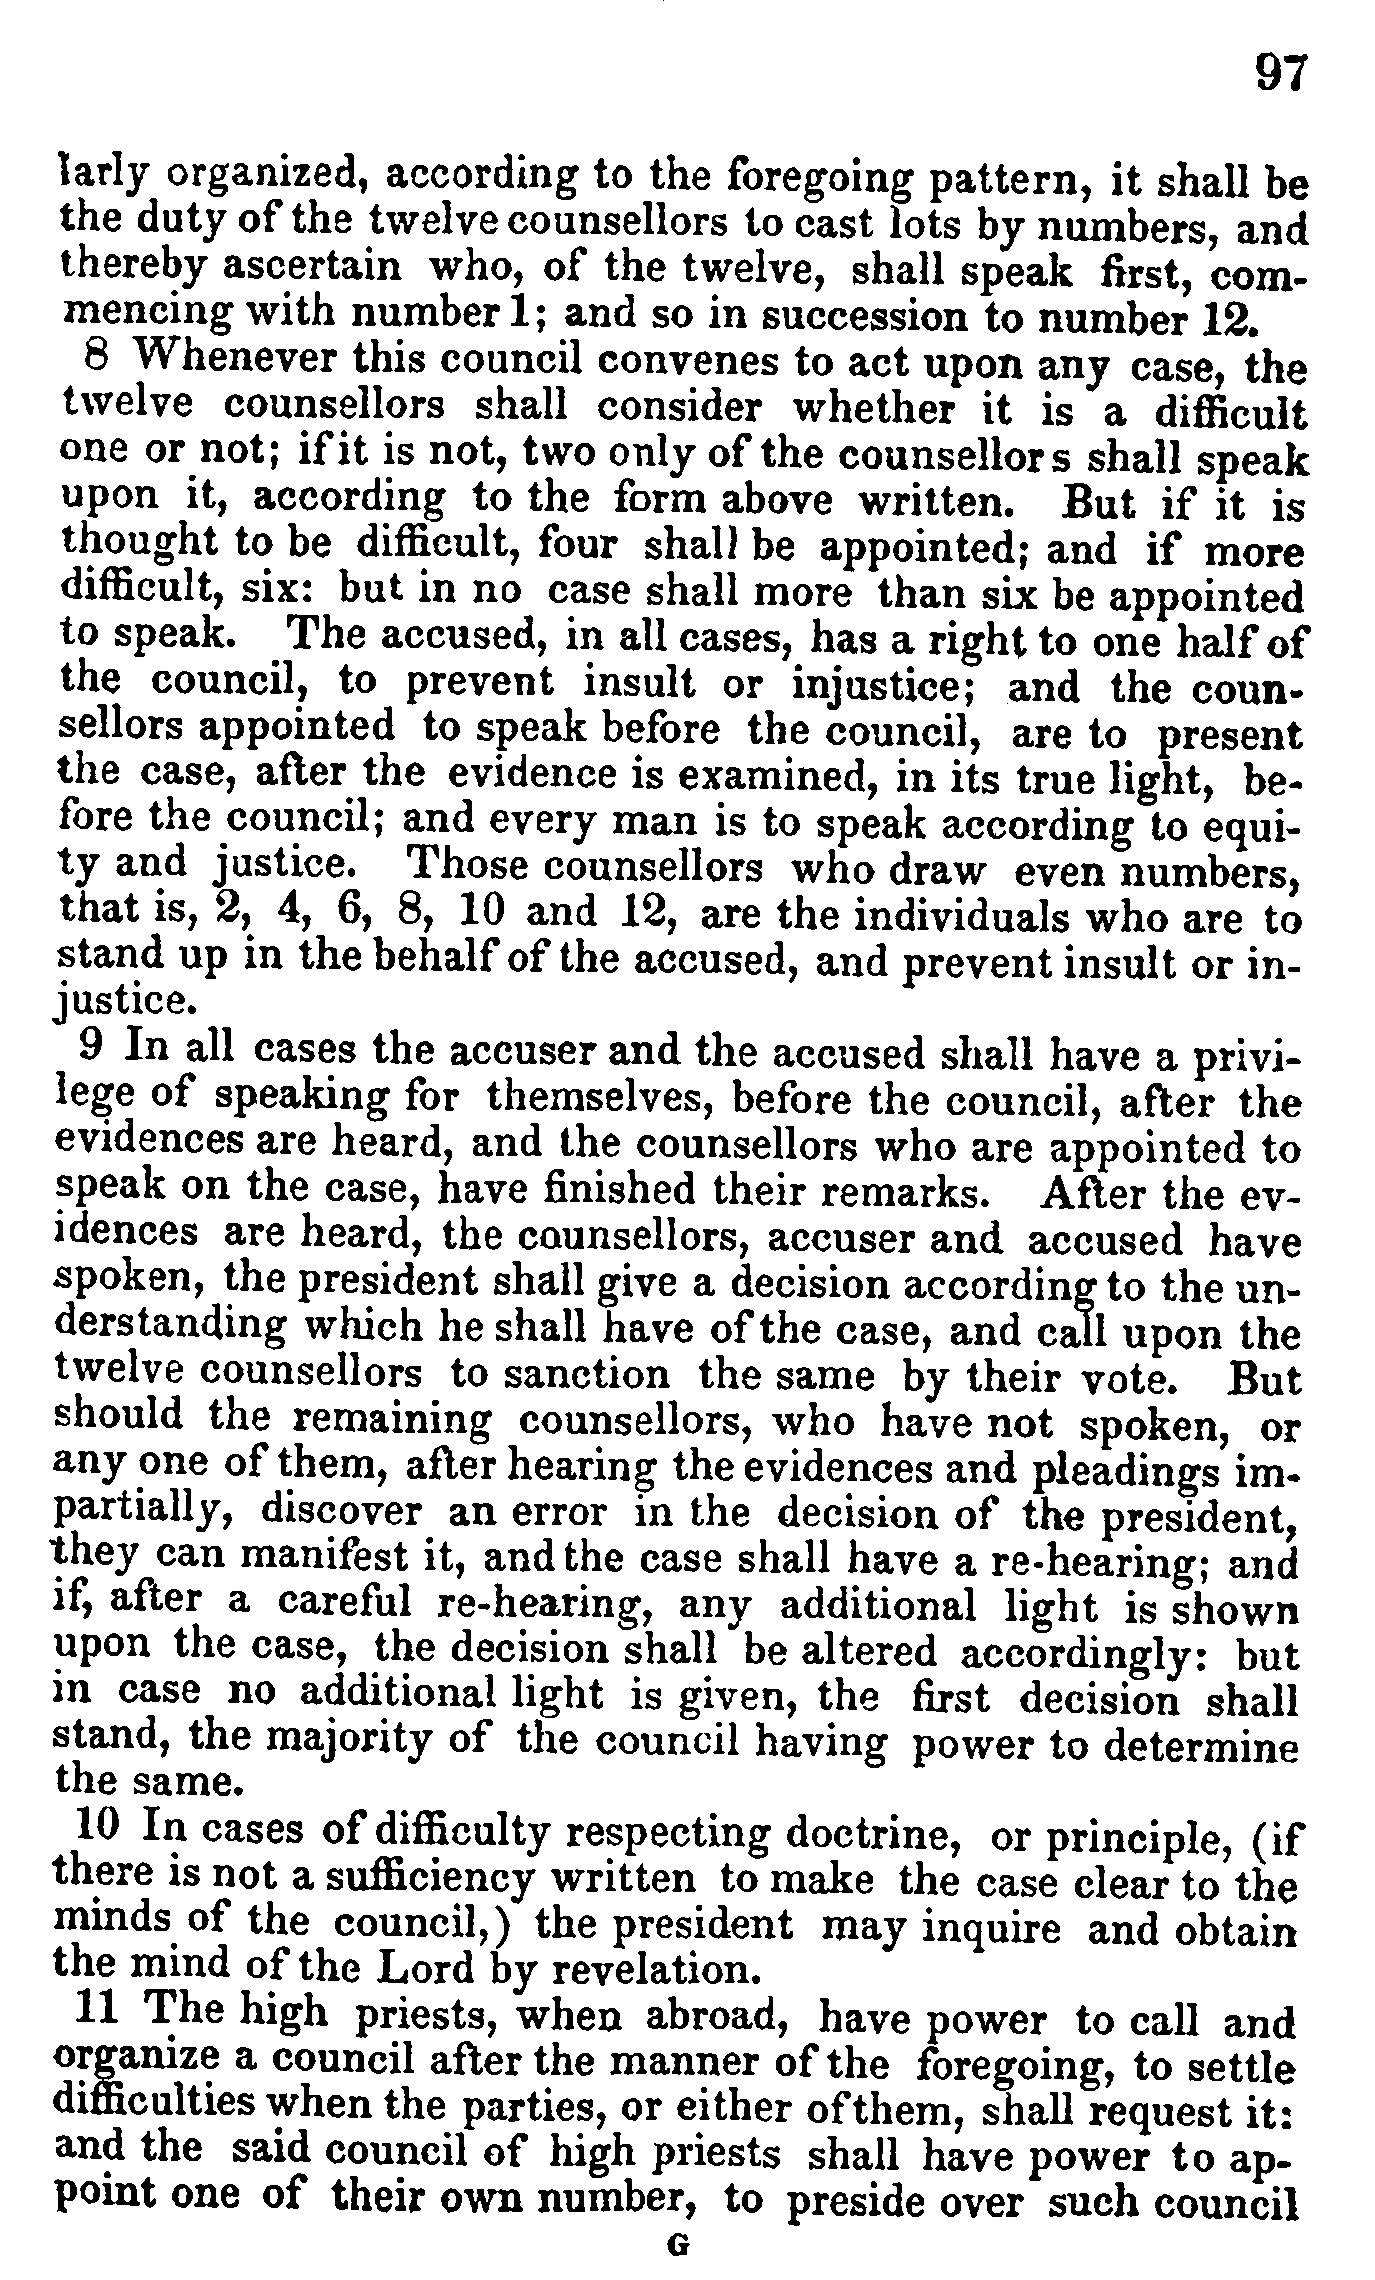 Doctrine and Covenants 1835 edition p.97